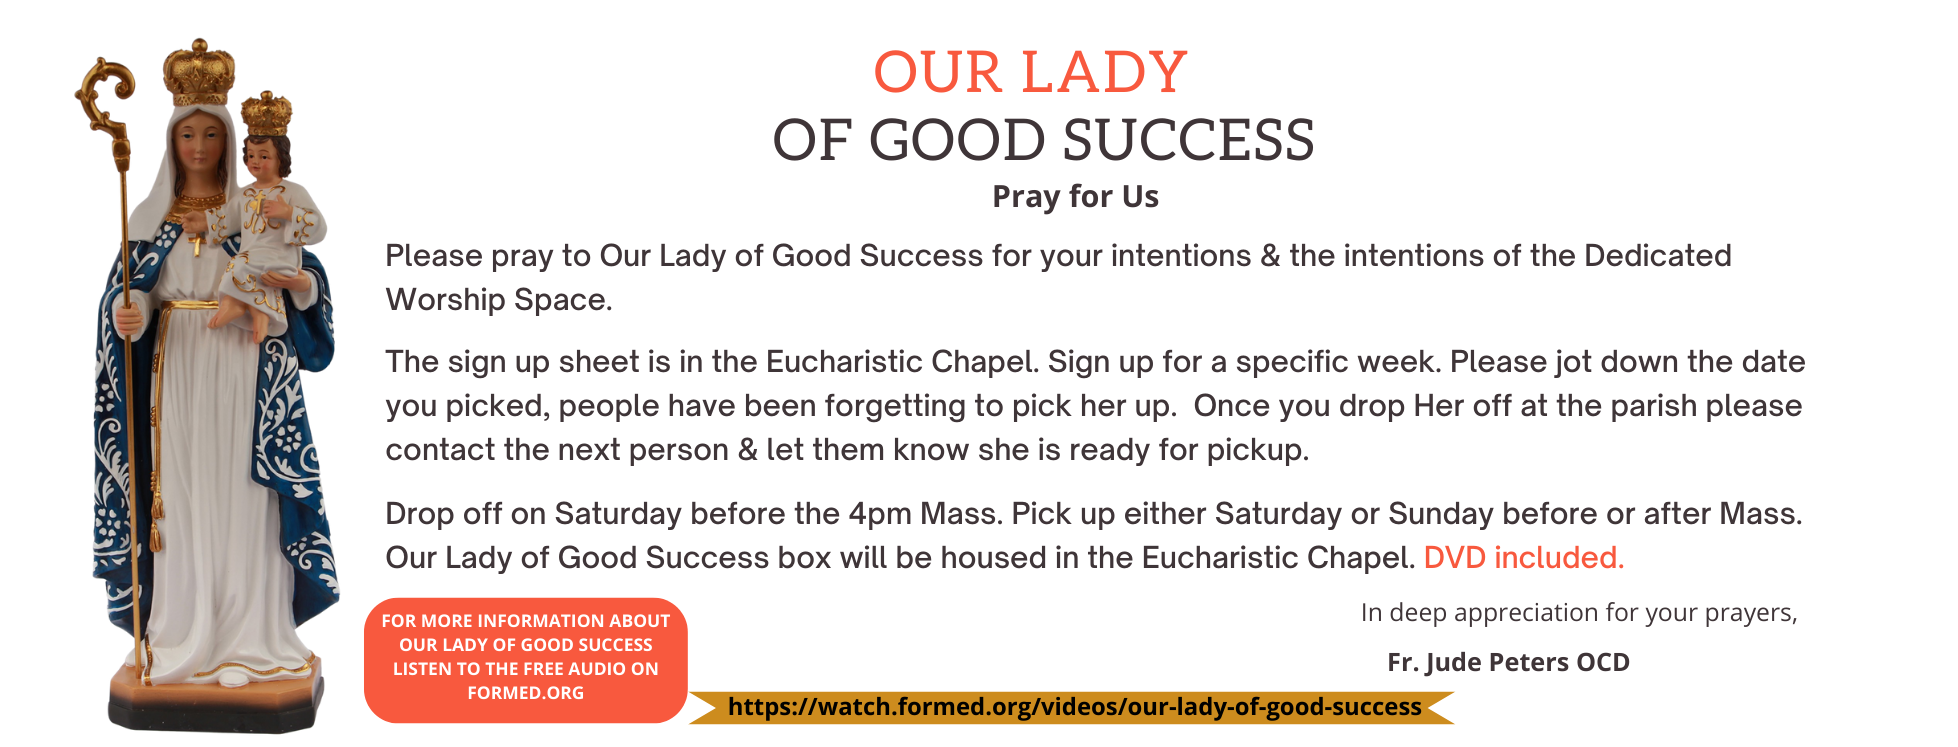 Please pray to Our Lady of Good Success for your intentions & the intentions of the Dedicated Worship Space. No one is signed up beginning Nov. 26. The sign up sheet is in the Eucharistic Chapel. Sign u (1)